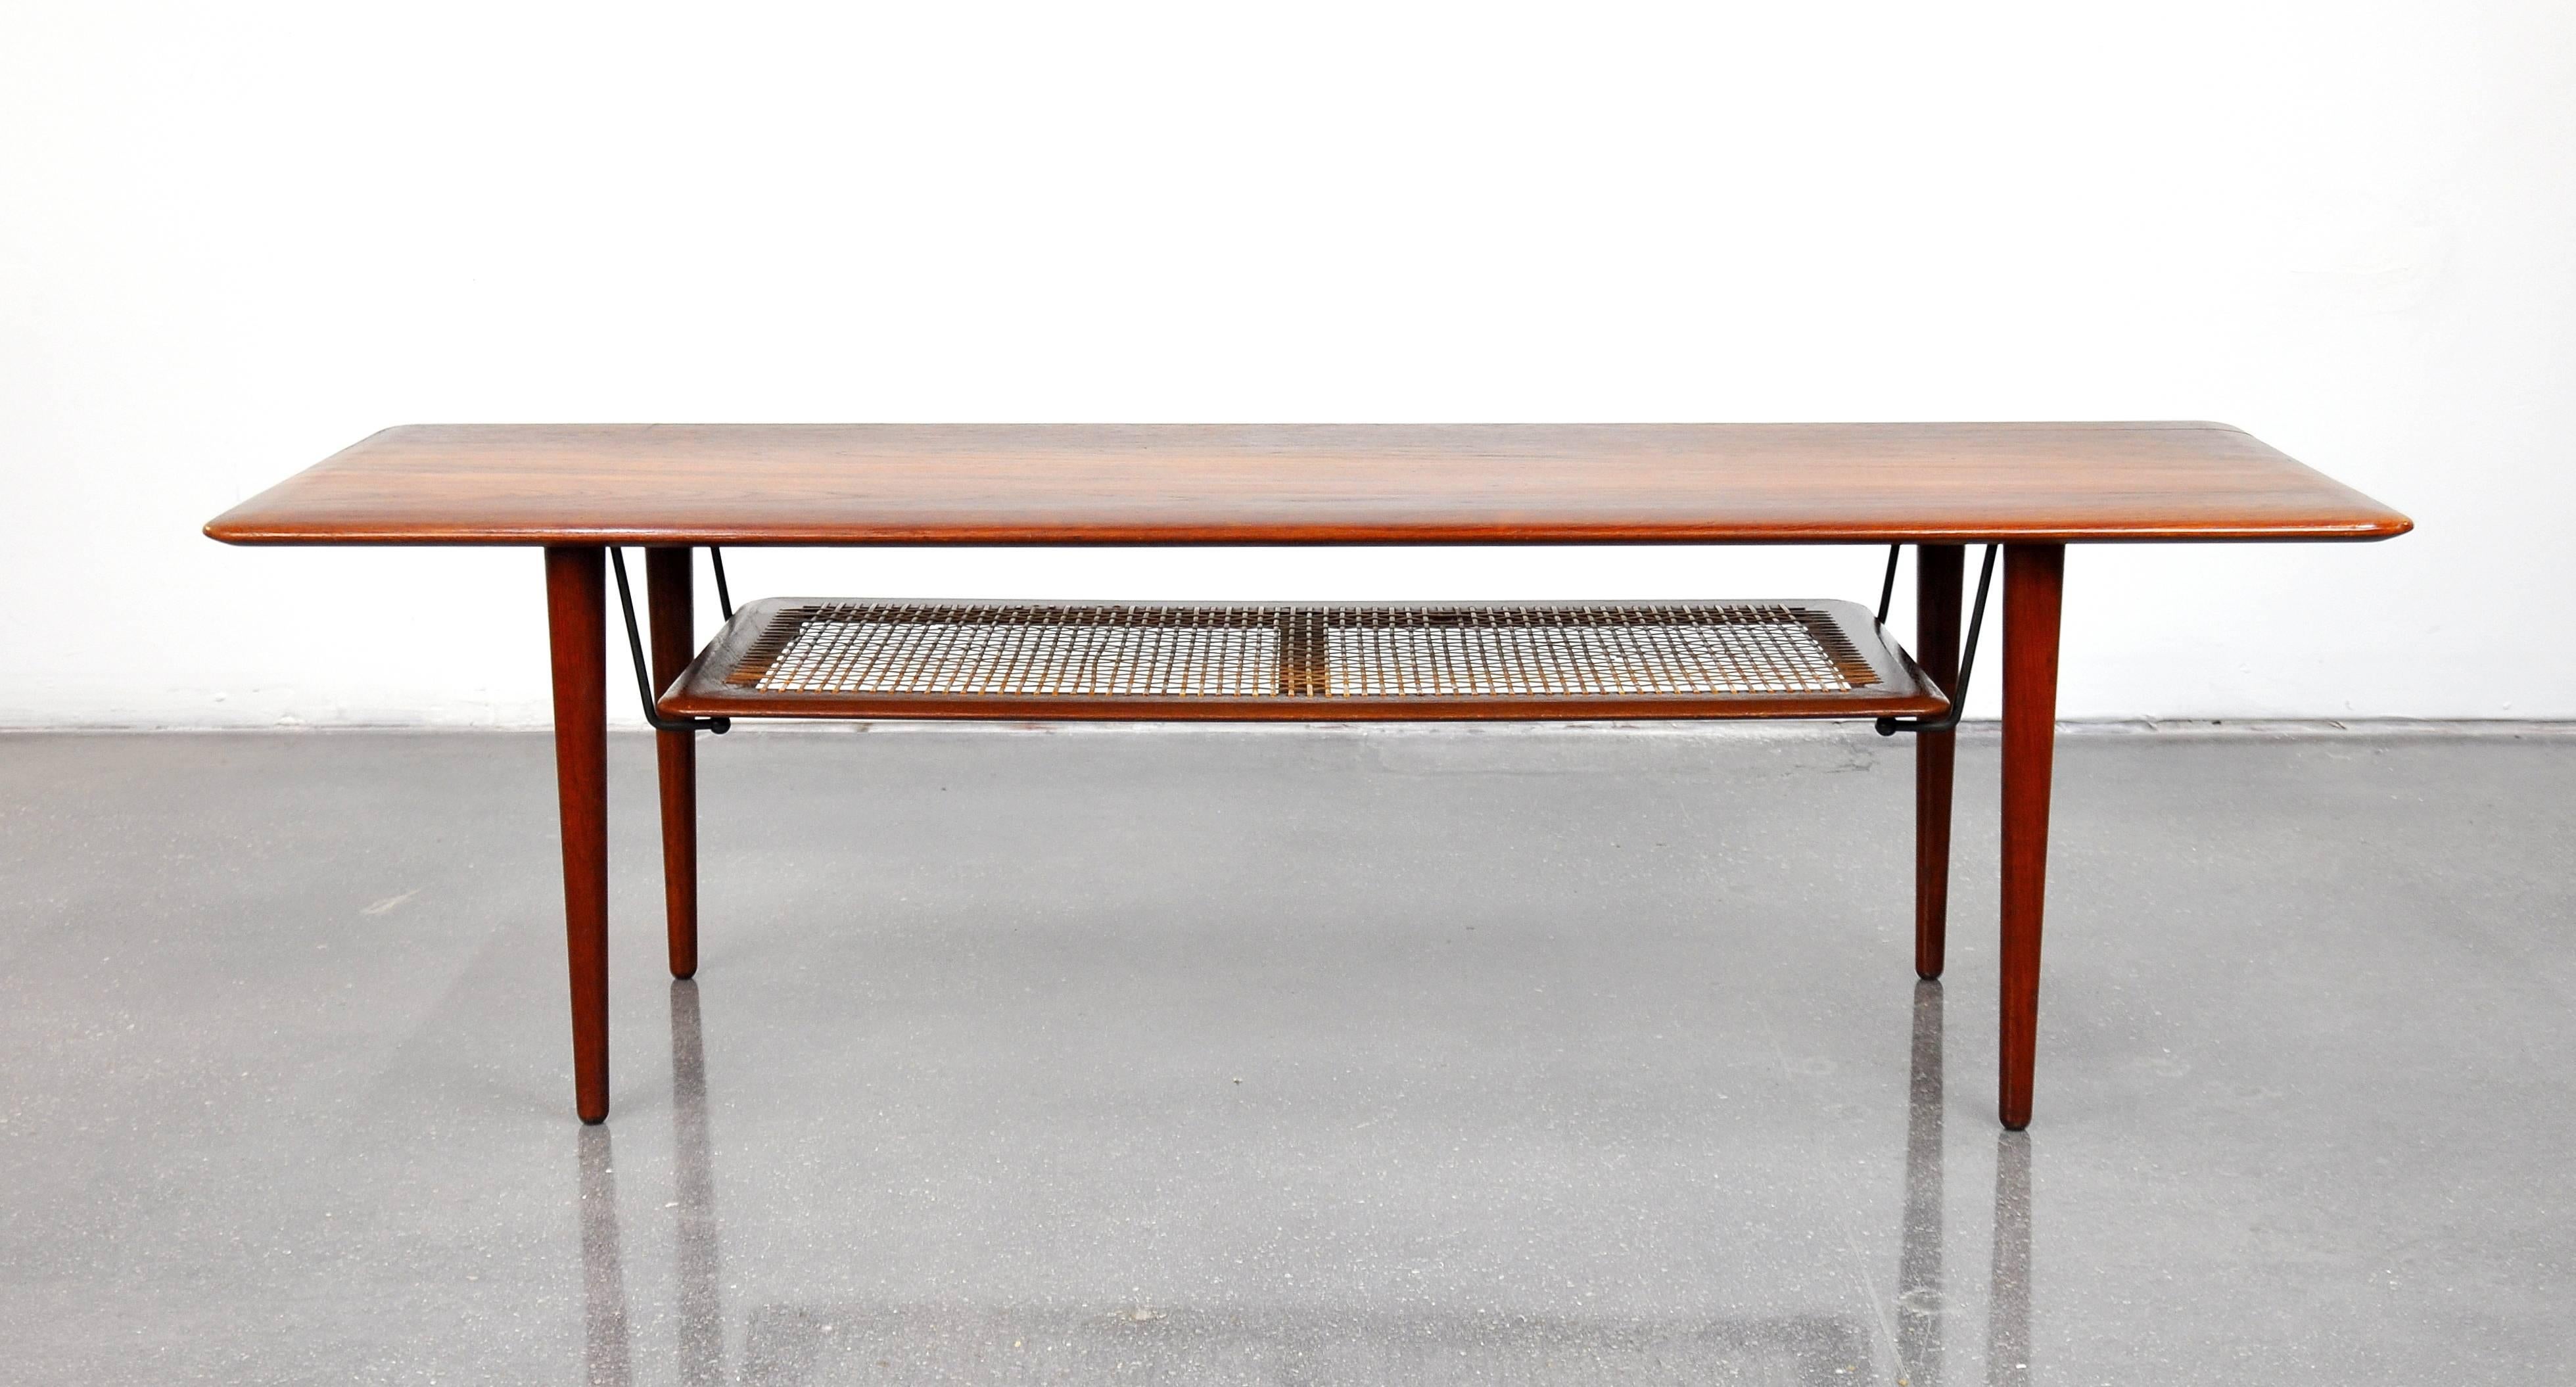 A vintage Danish Modern two-tiered cocktail table, model FD516, designed in 1956 by Peter Hvidt and Orla Molgaard Nielsen for France and Daverkosen (which became France and Son). The solid teak top and legs connect with brass angled supports to a